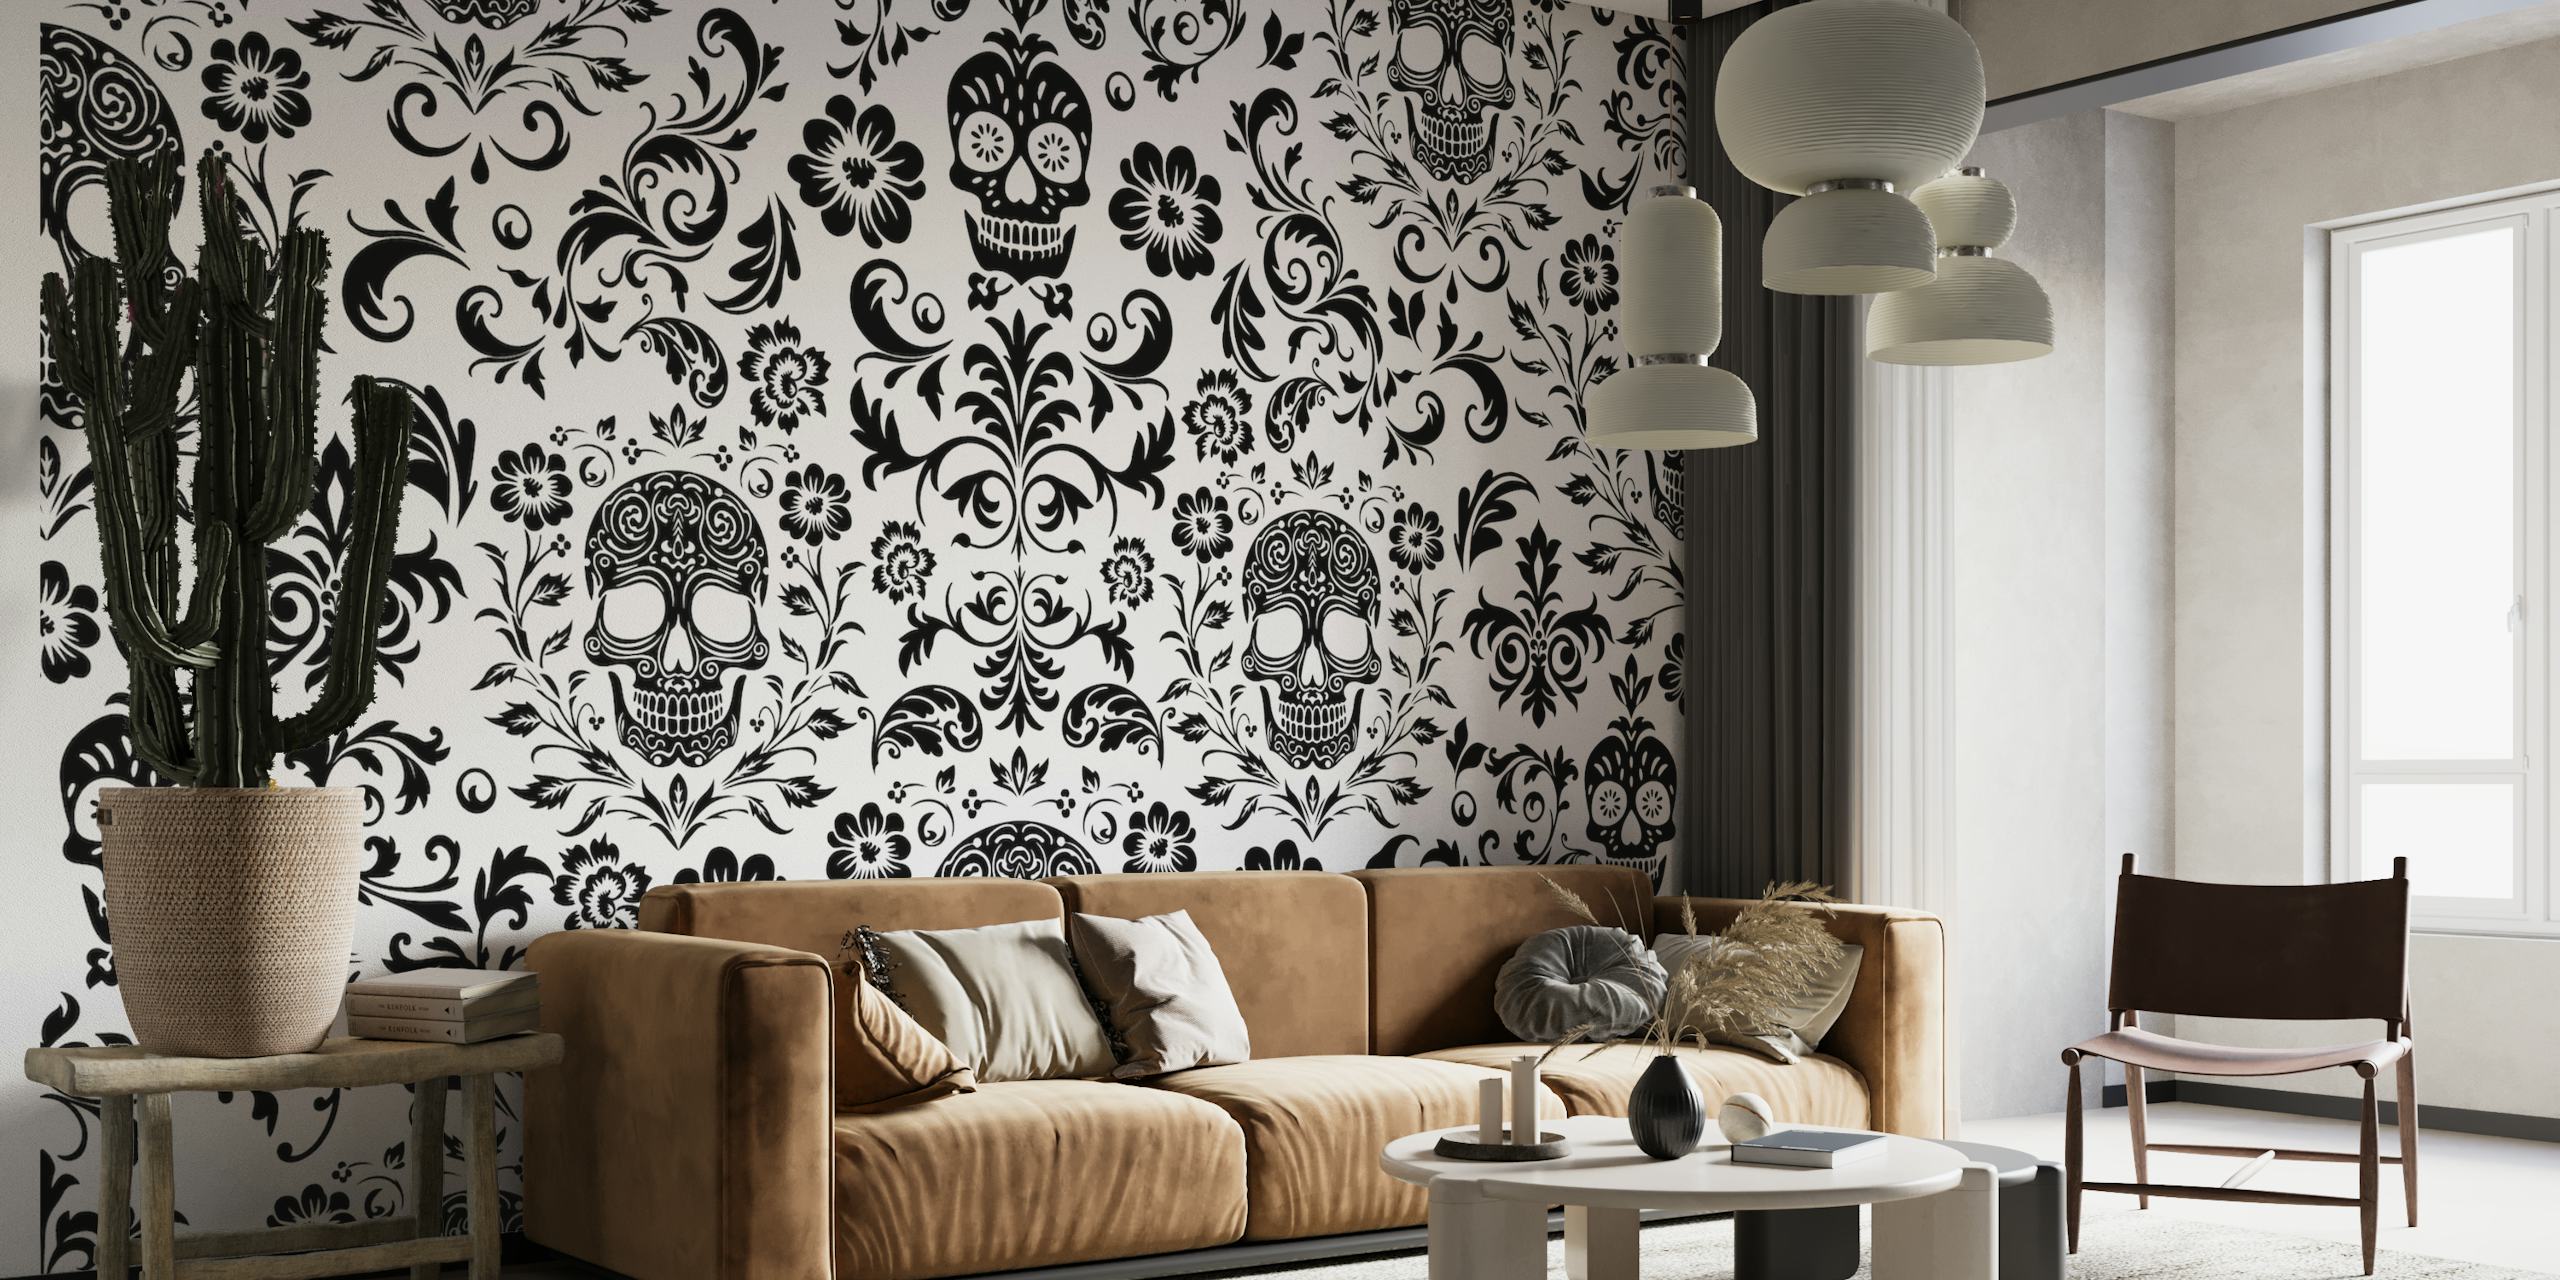 Mystical Macabre Damask wall mural in black and white with skull motifs and floral patterns